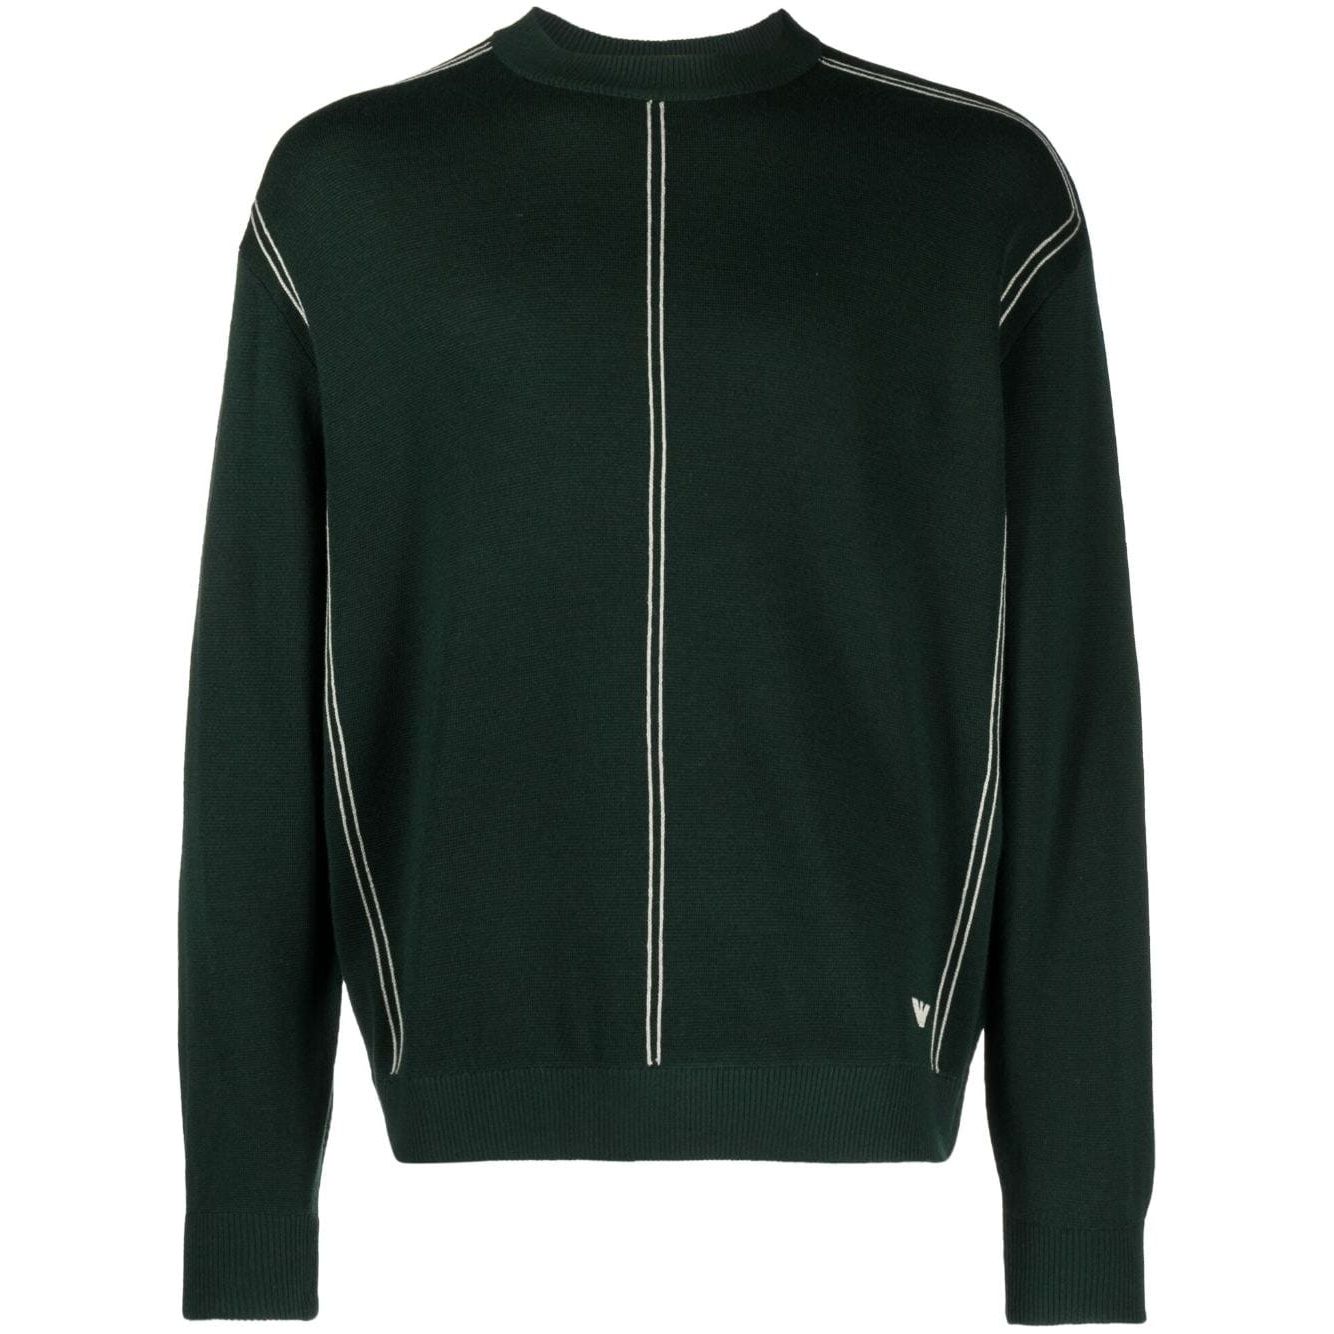 EMPORIO ARMANI SWEATER IN FABRIC STITCH VIRGIN WOOL BLEND WITH CORD-EFFECT JACQUARD STRIPES - Yooto